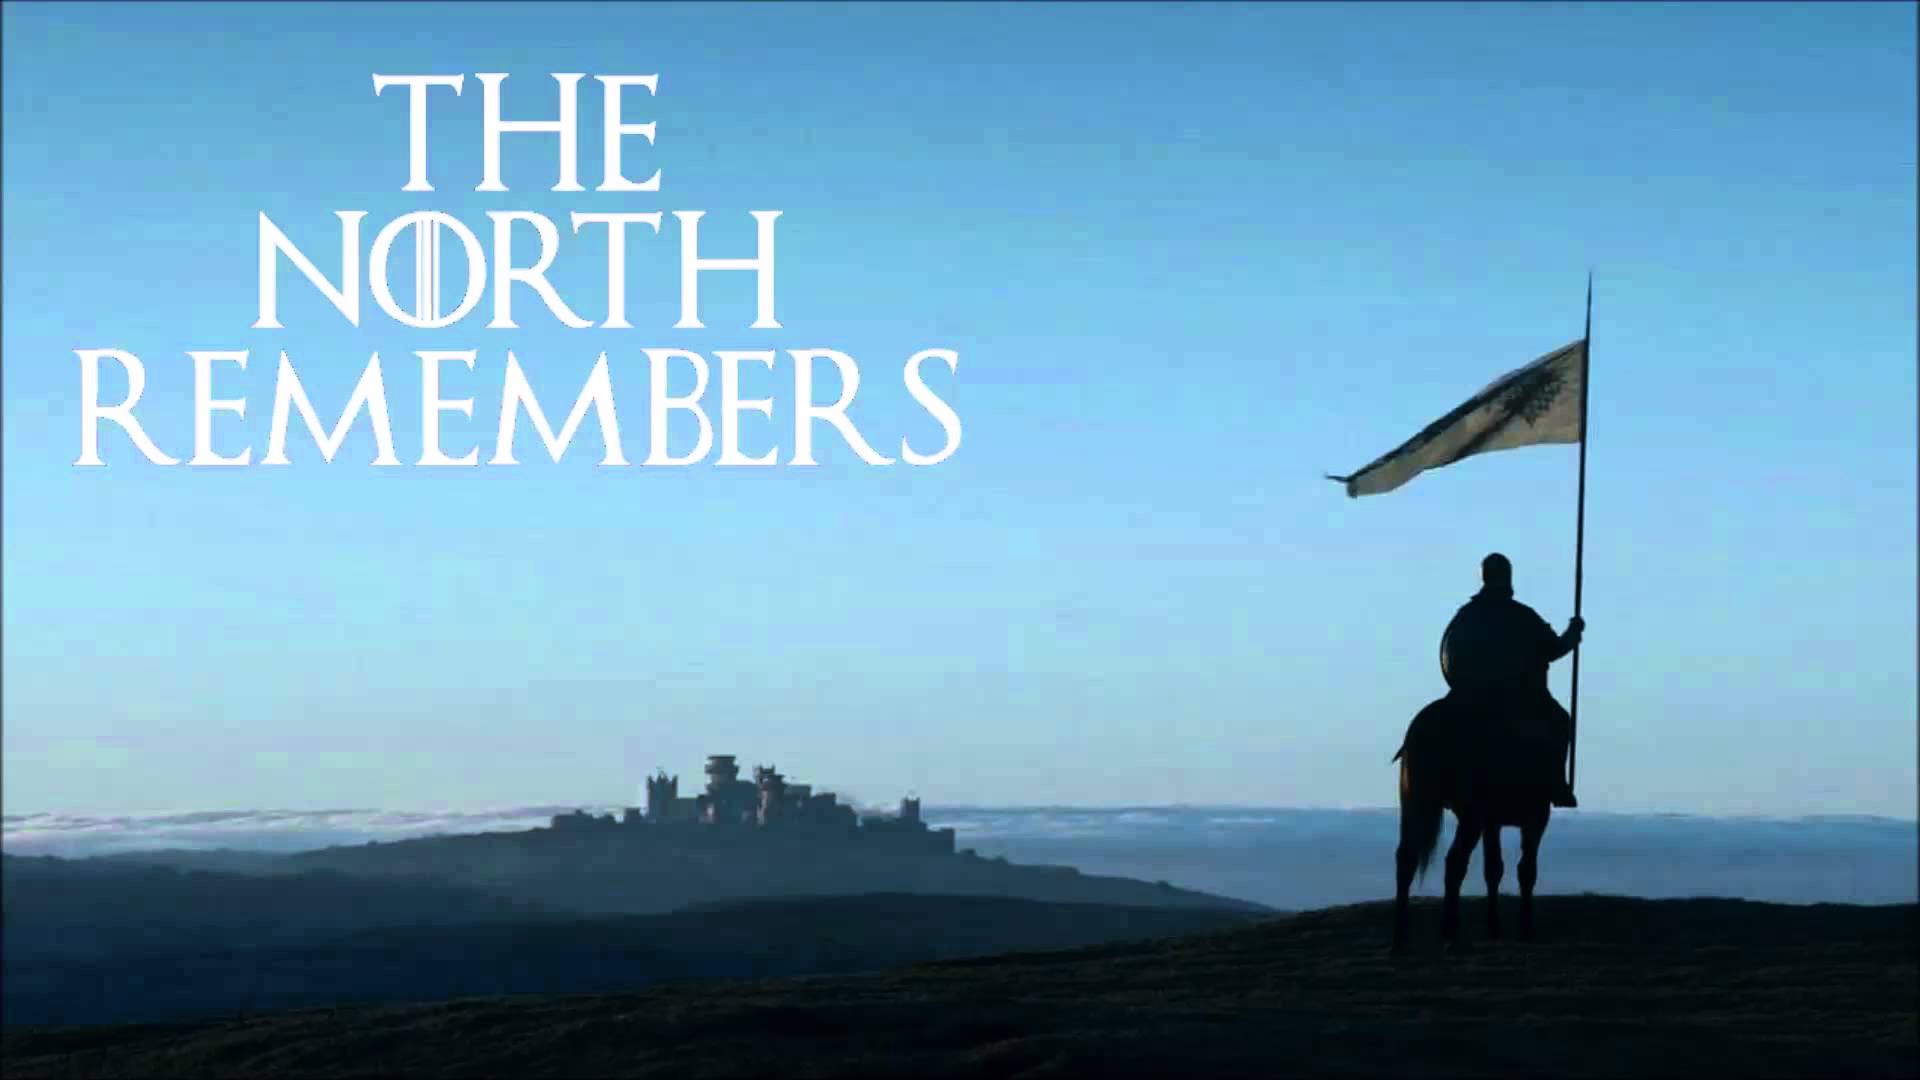 The North Remembers. Game of Thrones Beat prod.